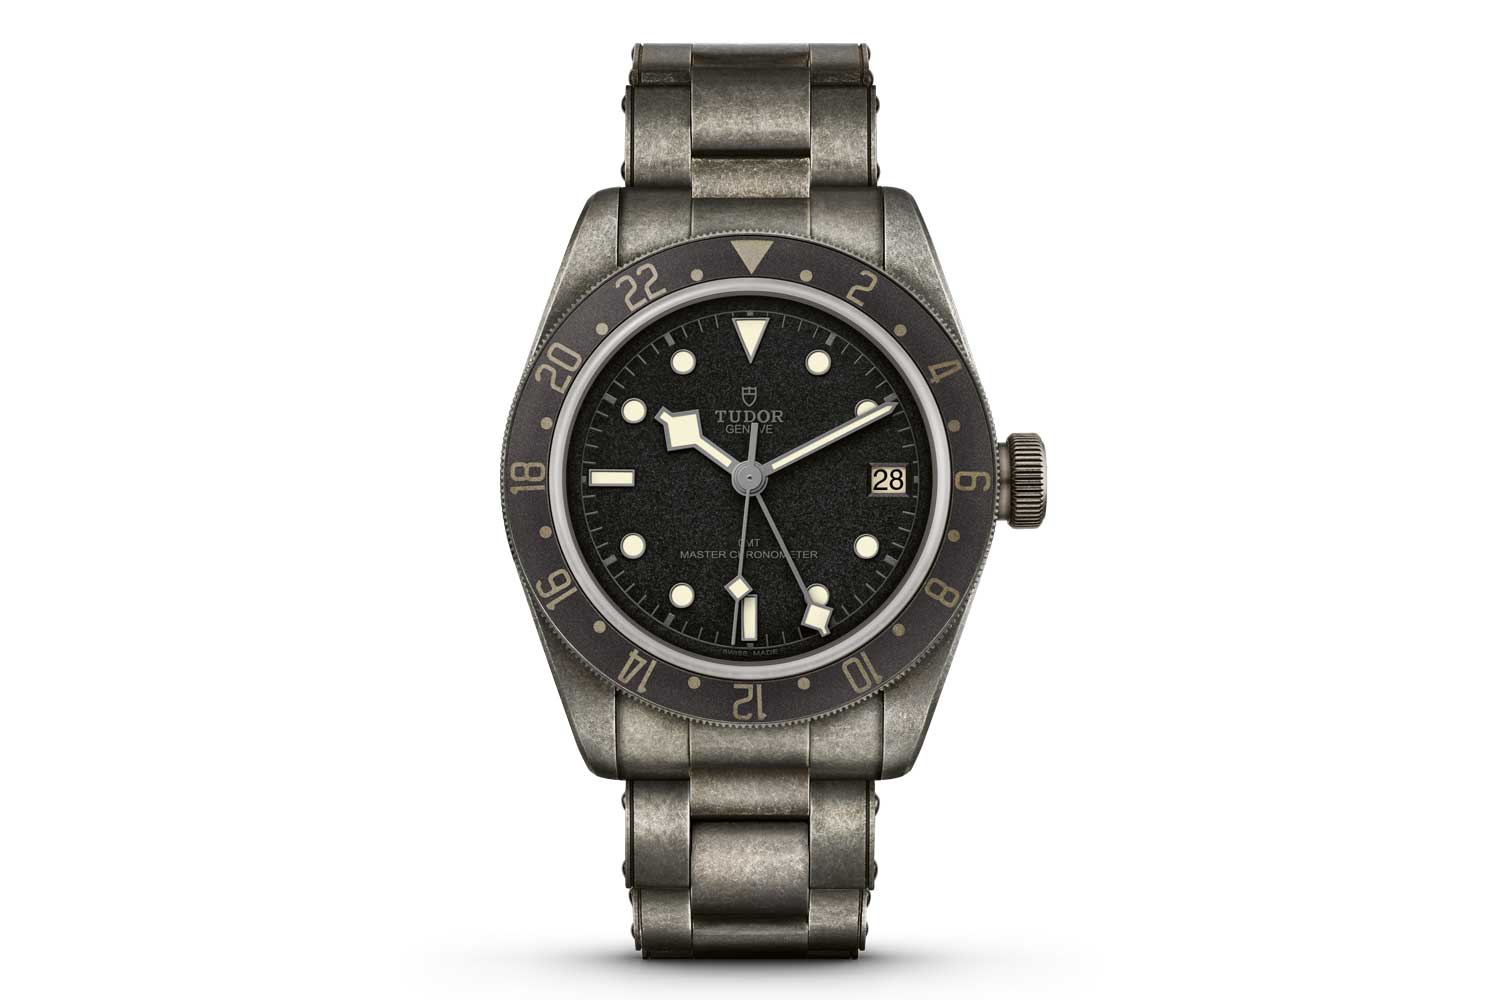 The Tudor Black Bay GMT One, a pièce unique for the 2021 Only Watch charity auction